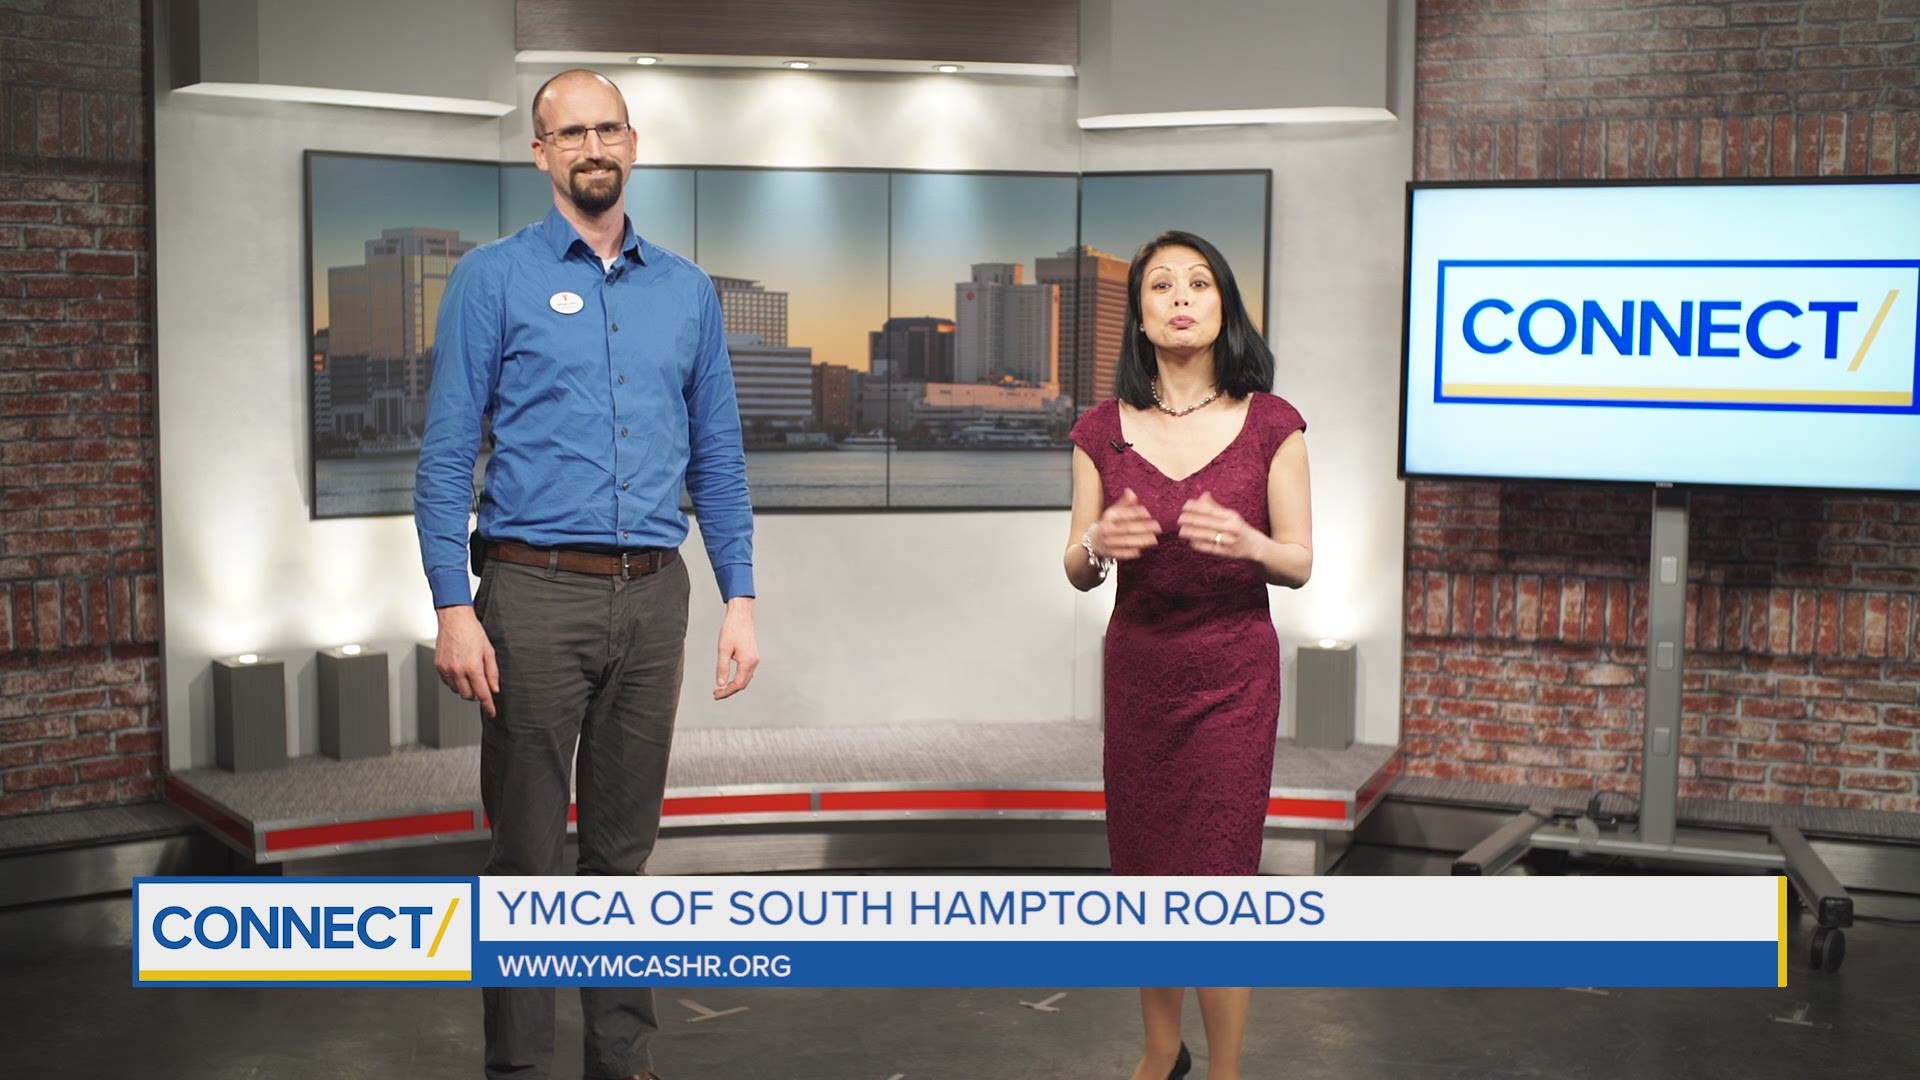 Now's the time to consider summer camp for your children. YMCA of South Hampton Roads talked about some of their summer activities and programs.